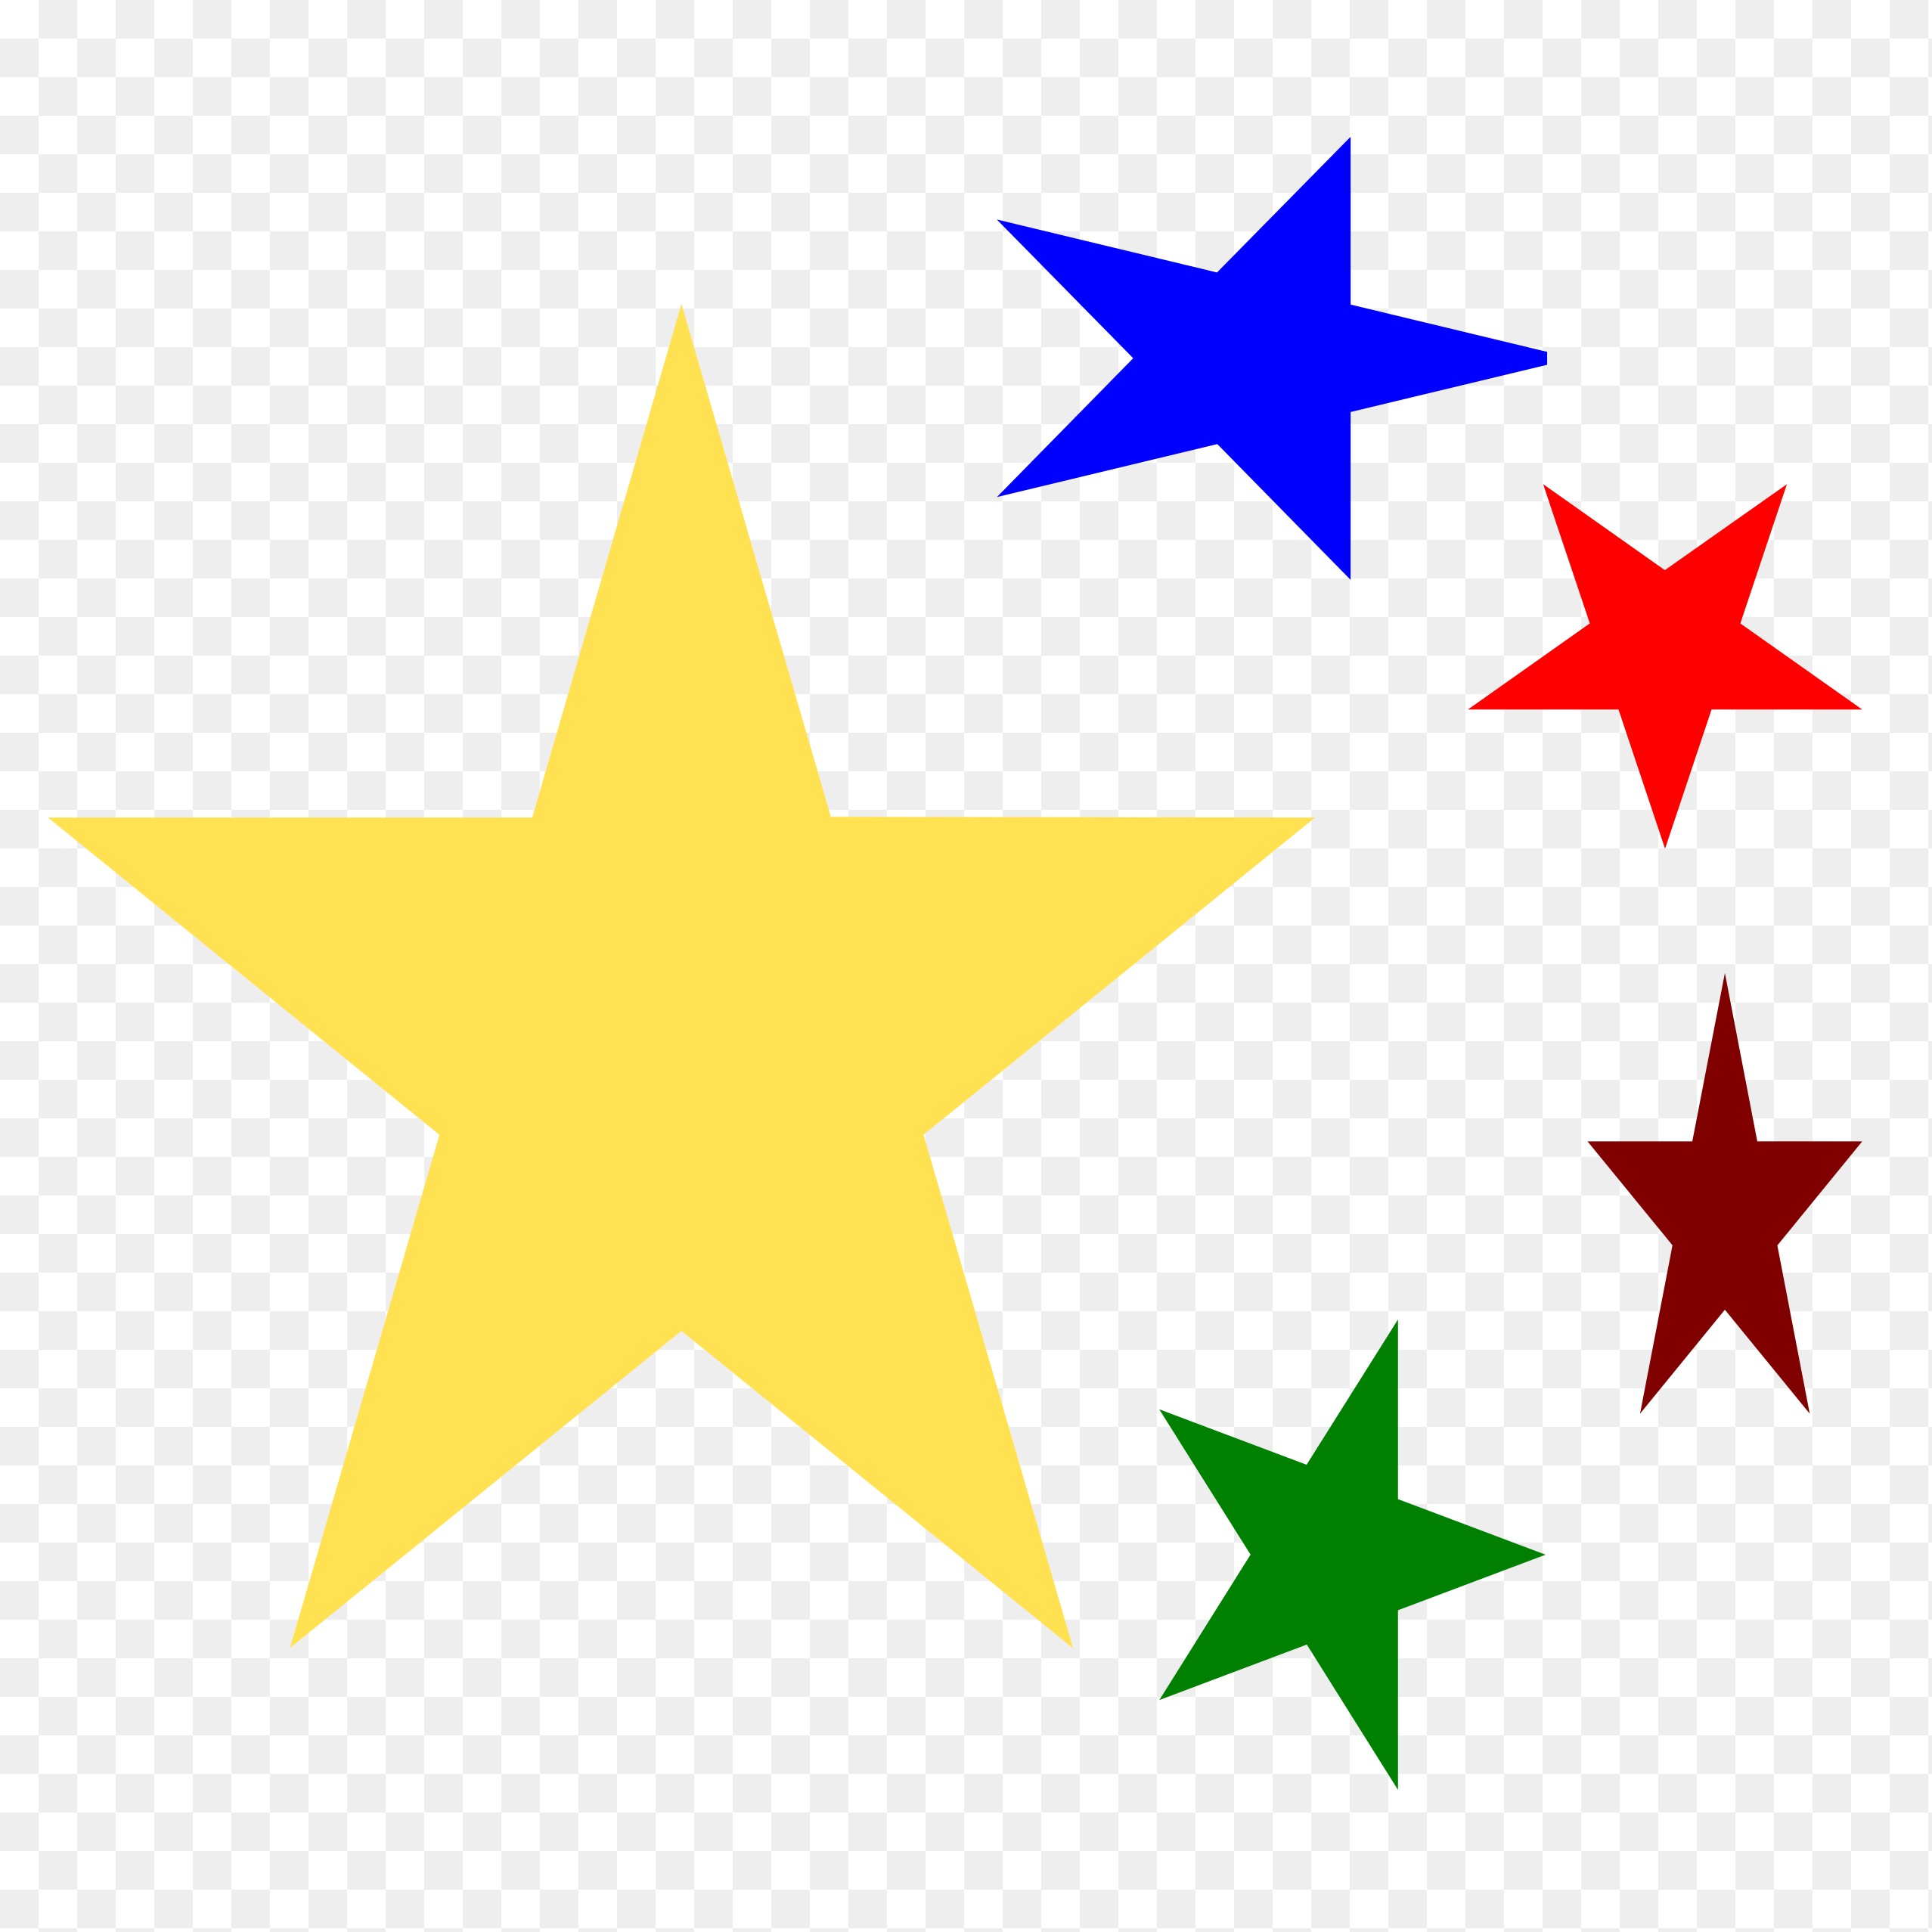 Gold star clipart free clipart image